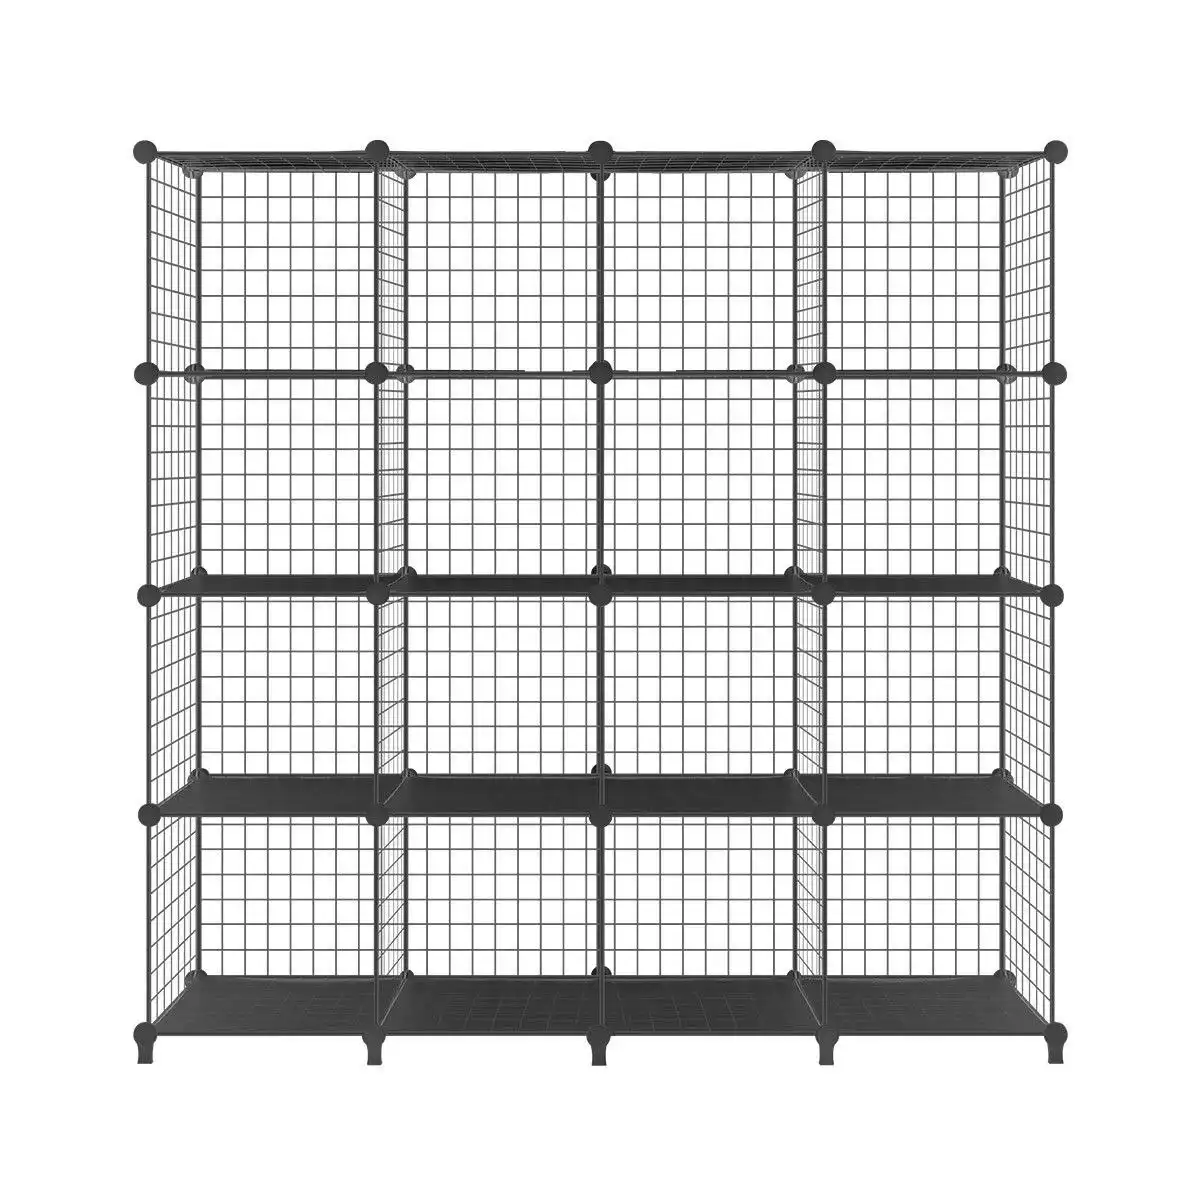 Ausway Metal Wire 16-Cube Organizer DIY Storage Modular Cabinet for Toys Books Clothes Black